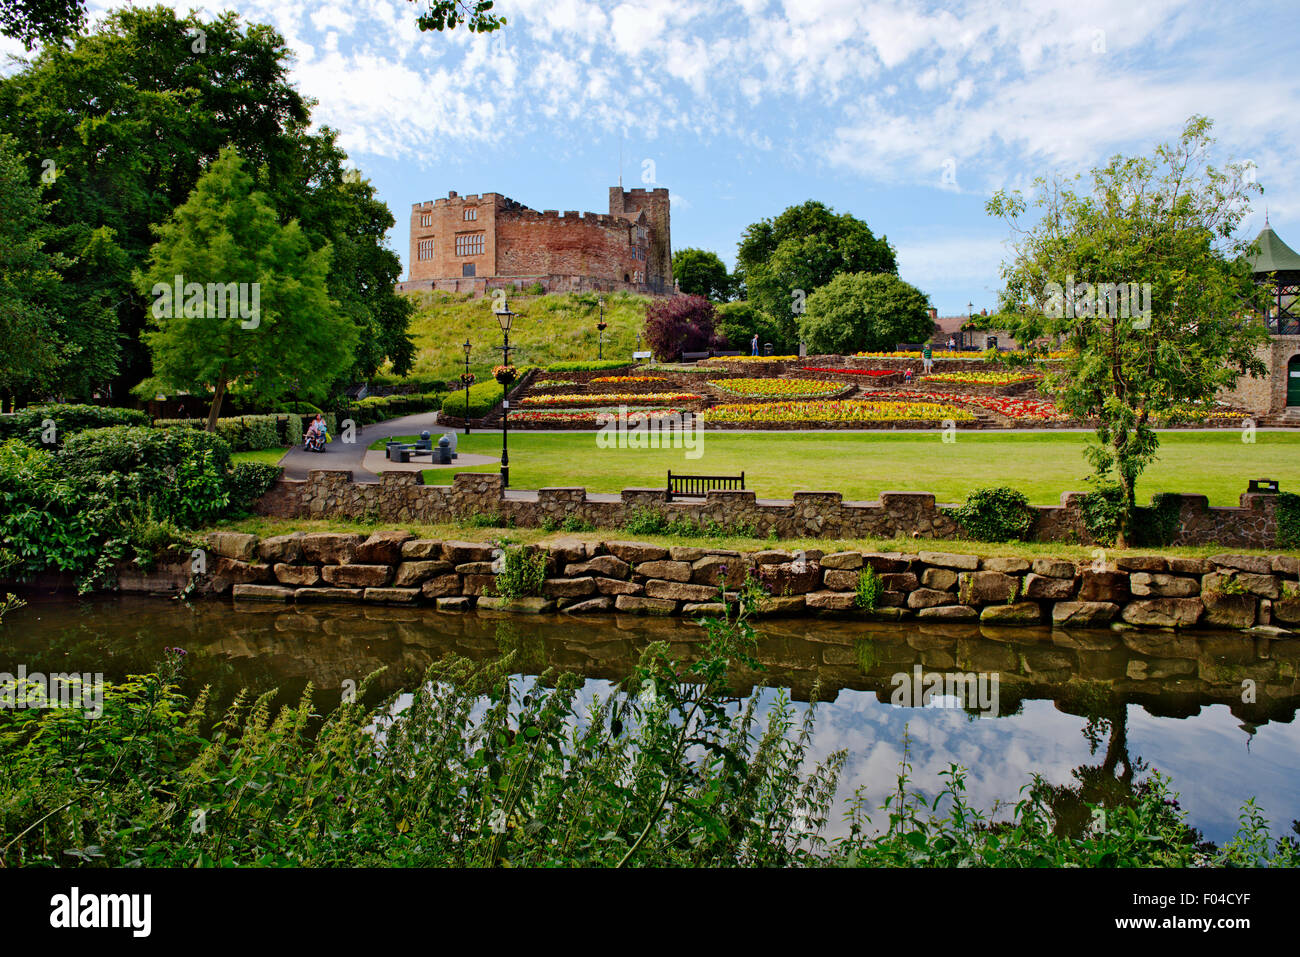 Castle and Castle Park gardens with Anker River, Tamworth, Staffordshire Stock Photo